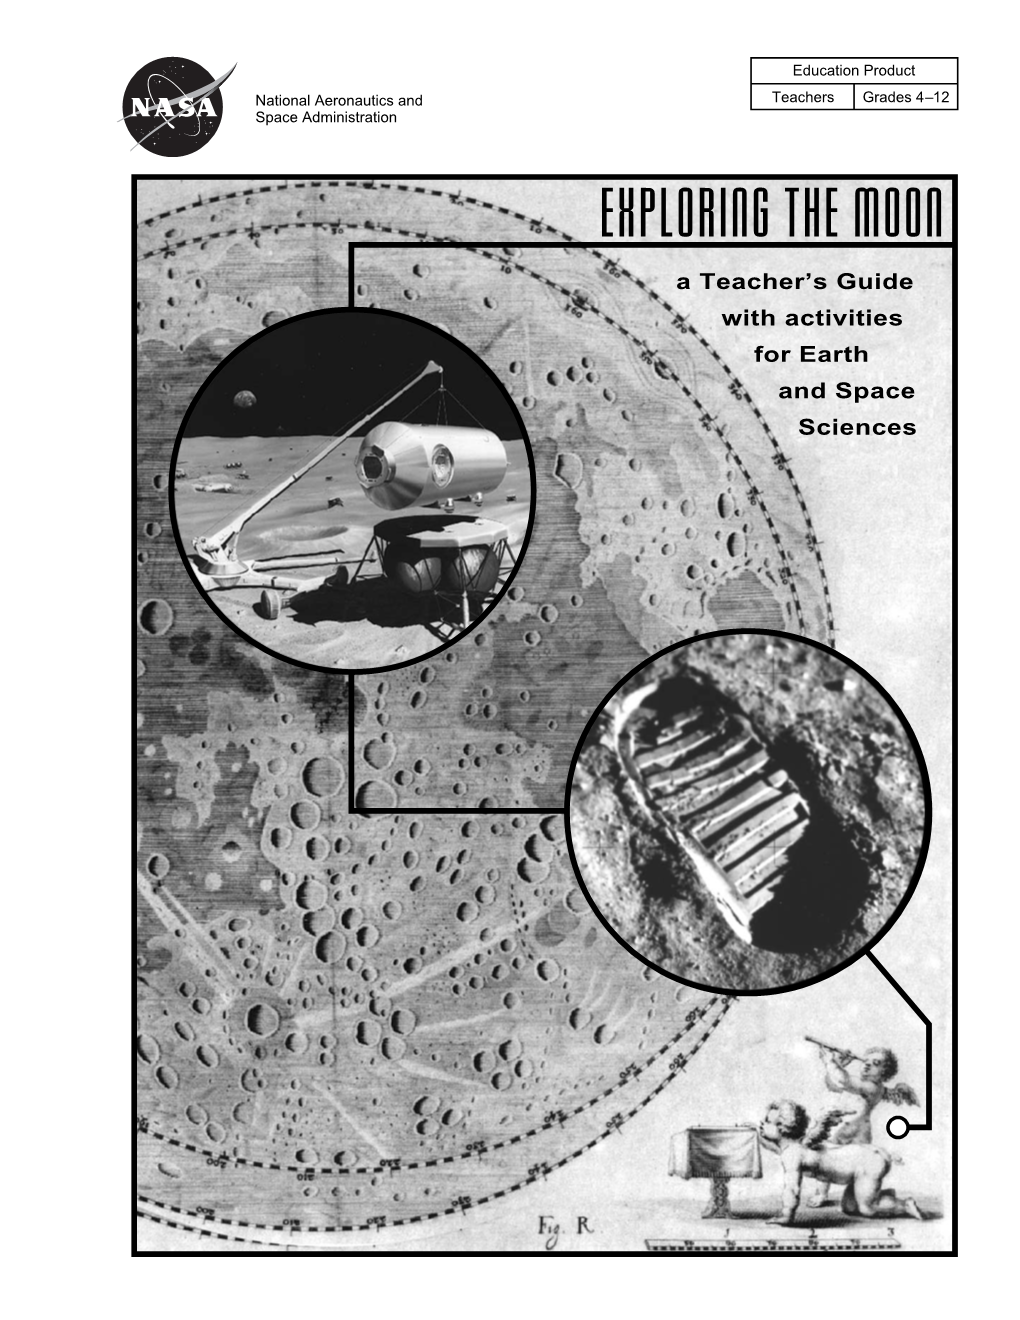 Exploring the Moon -- a Teacher's Guide with Activities, NASA EG-1997-10-116-HQ I Table of Contents